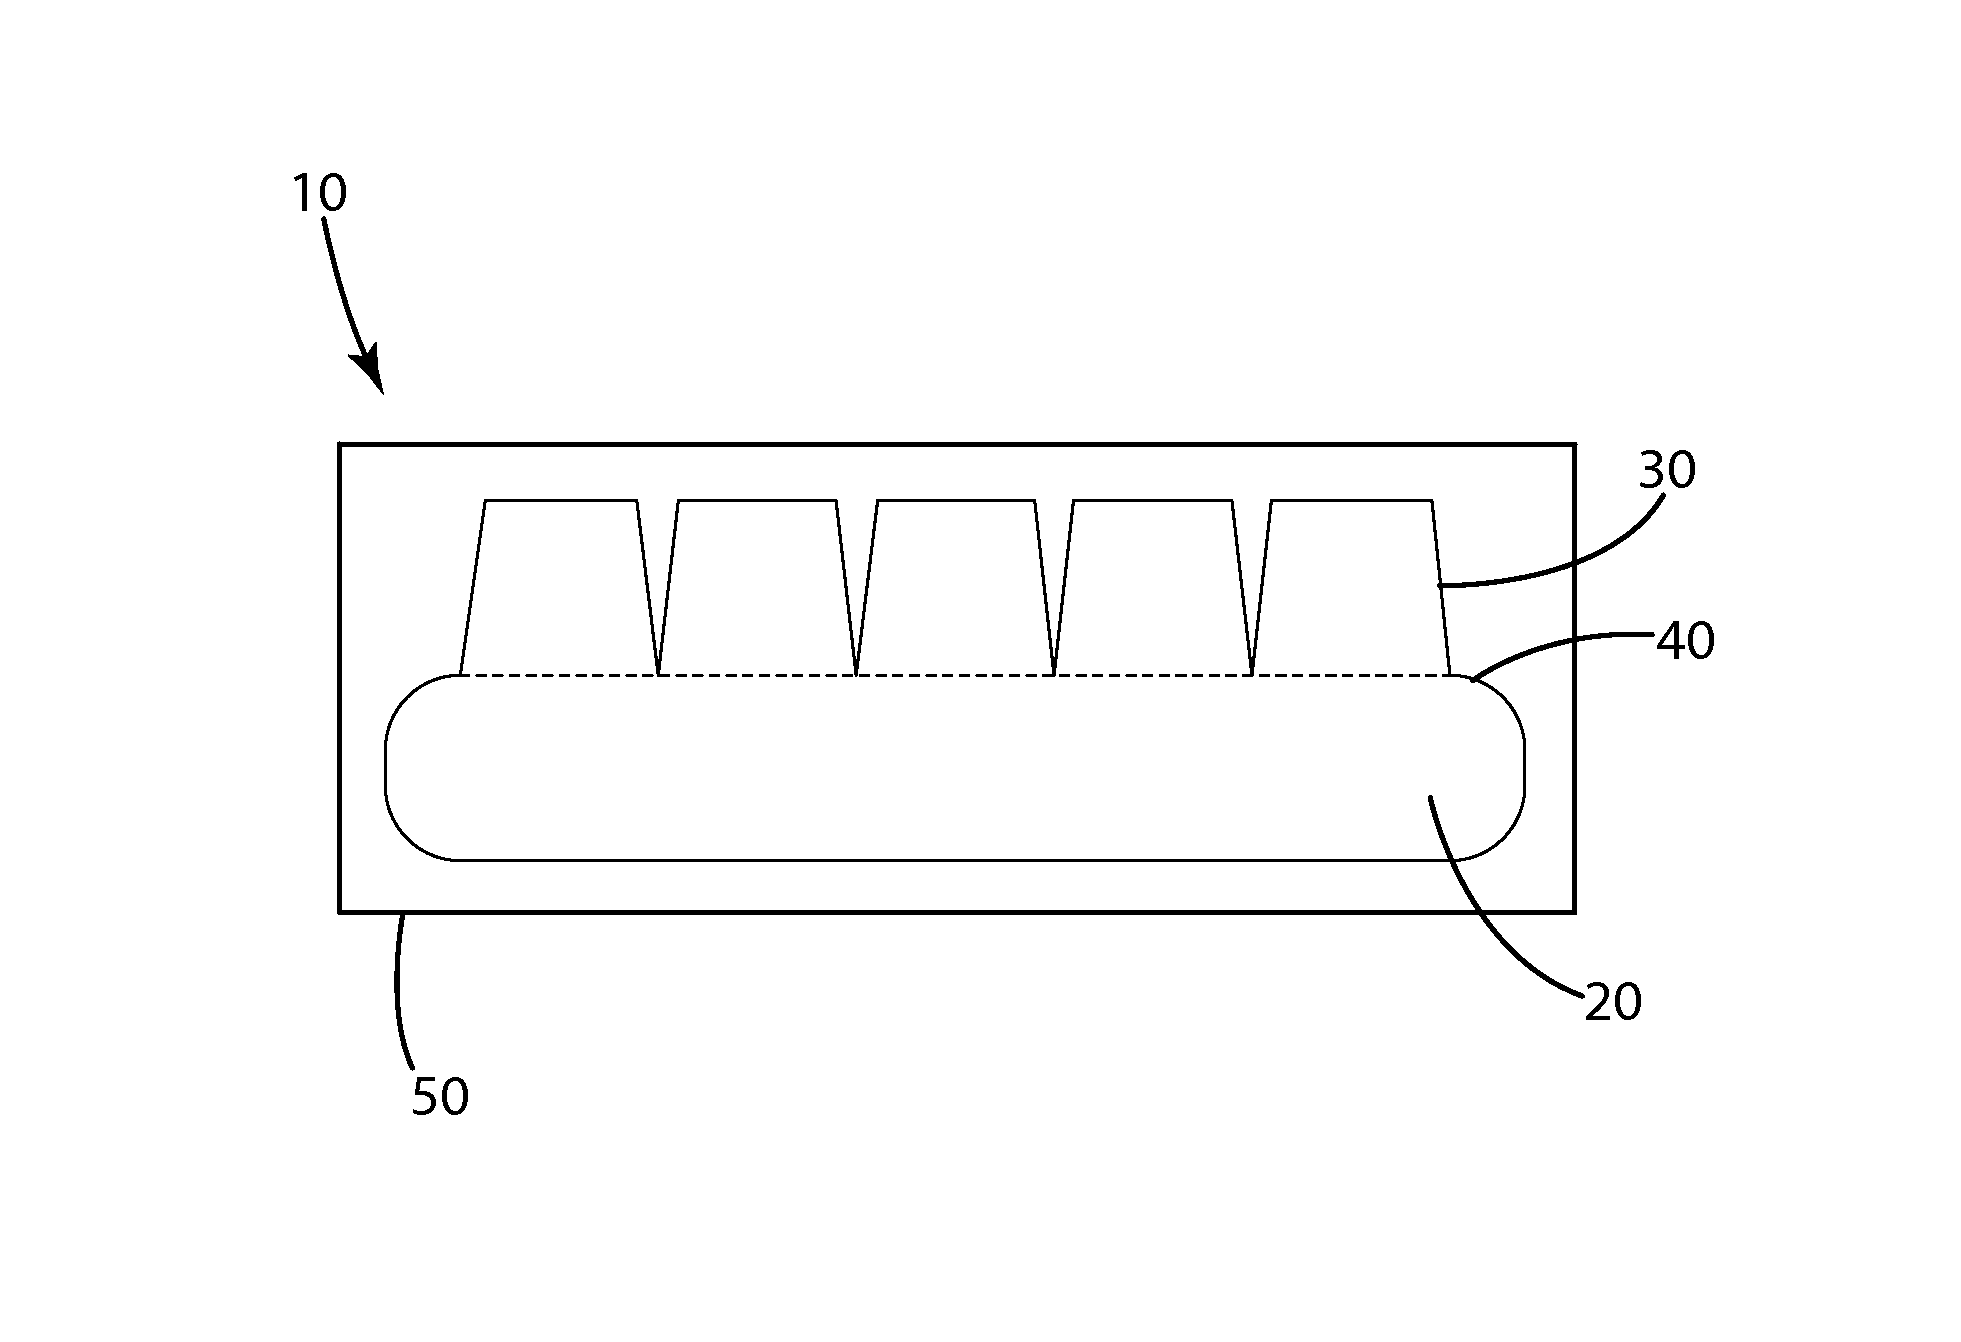 Oral care layer and related method of manufacture